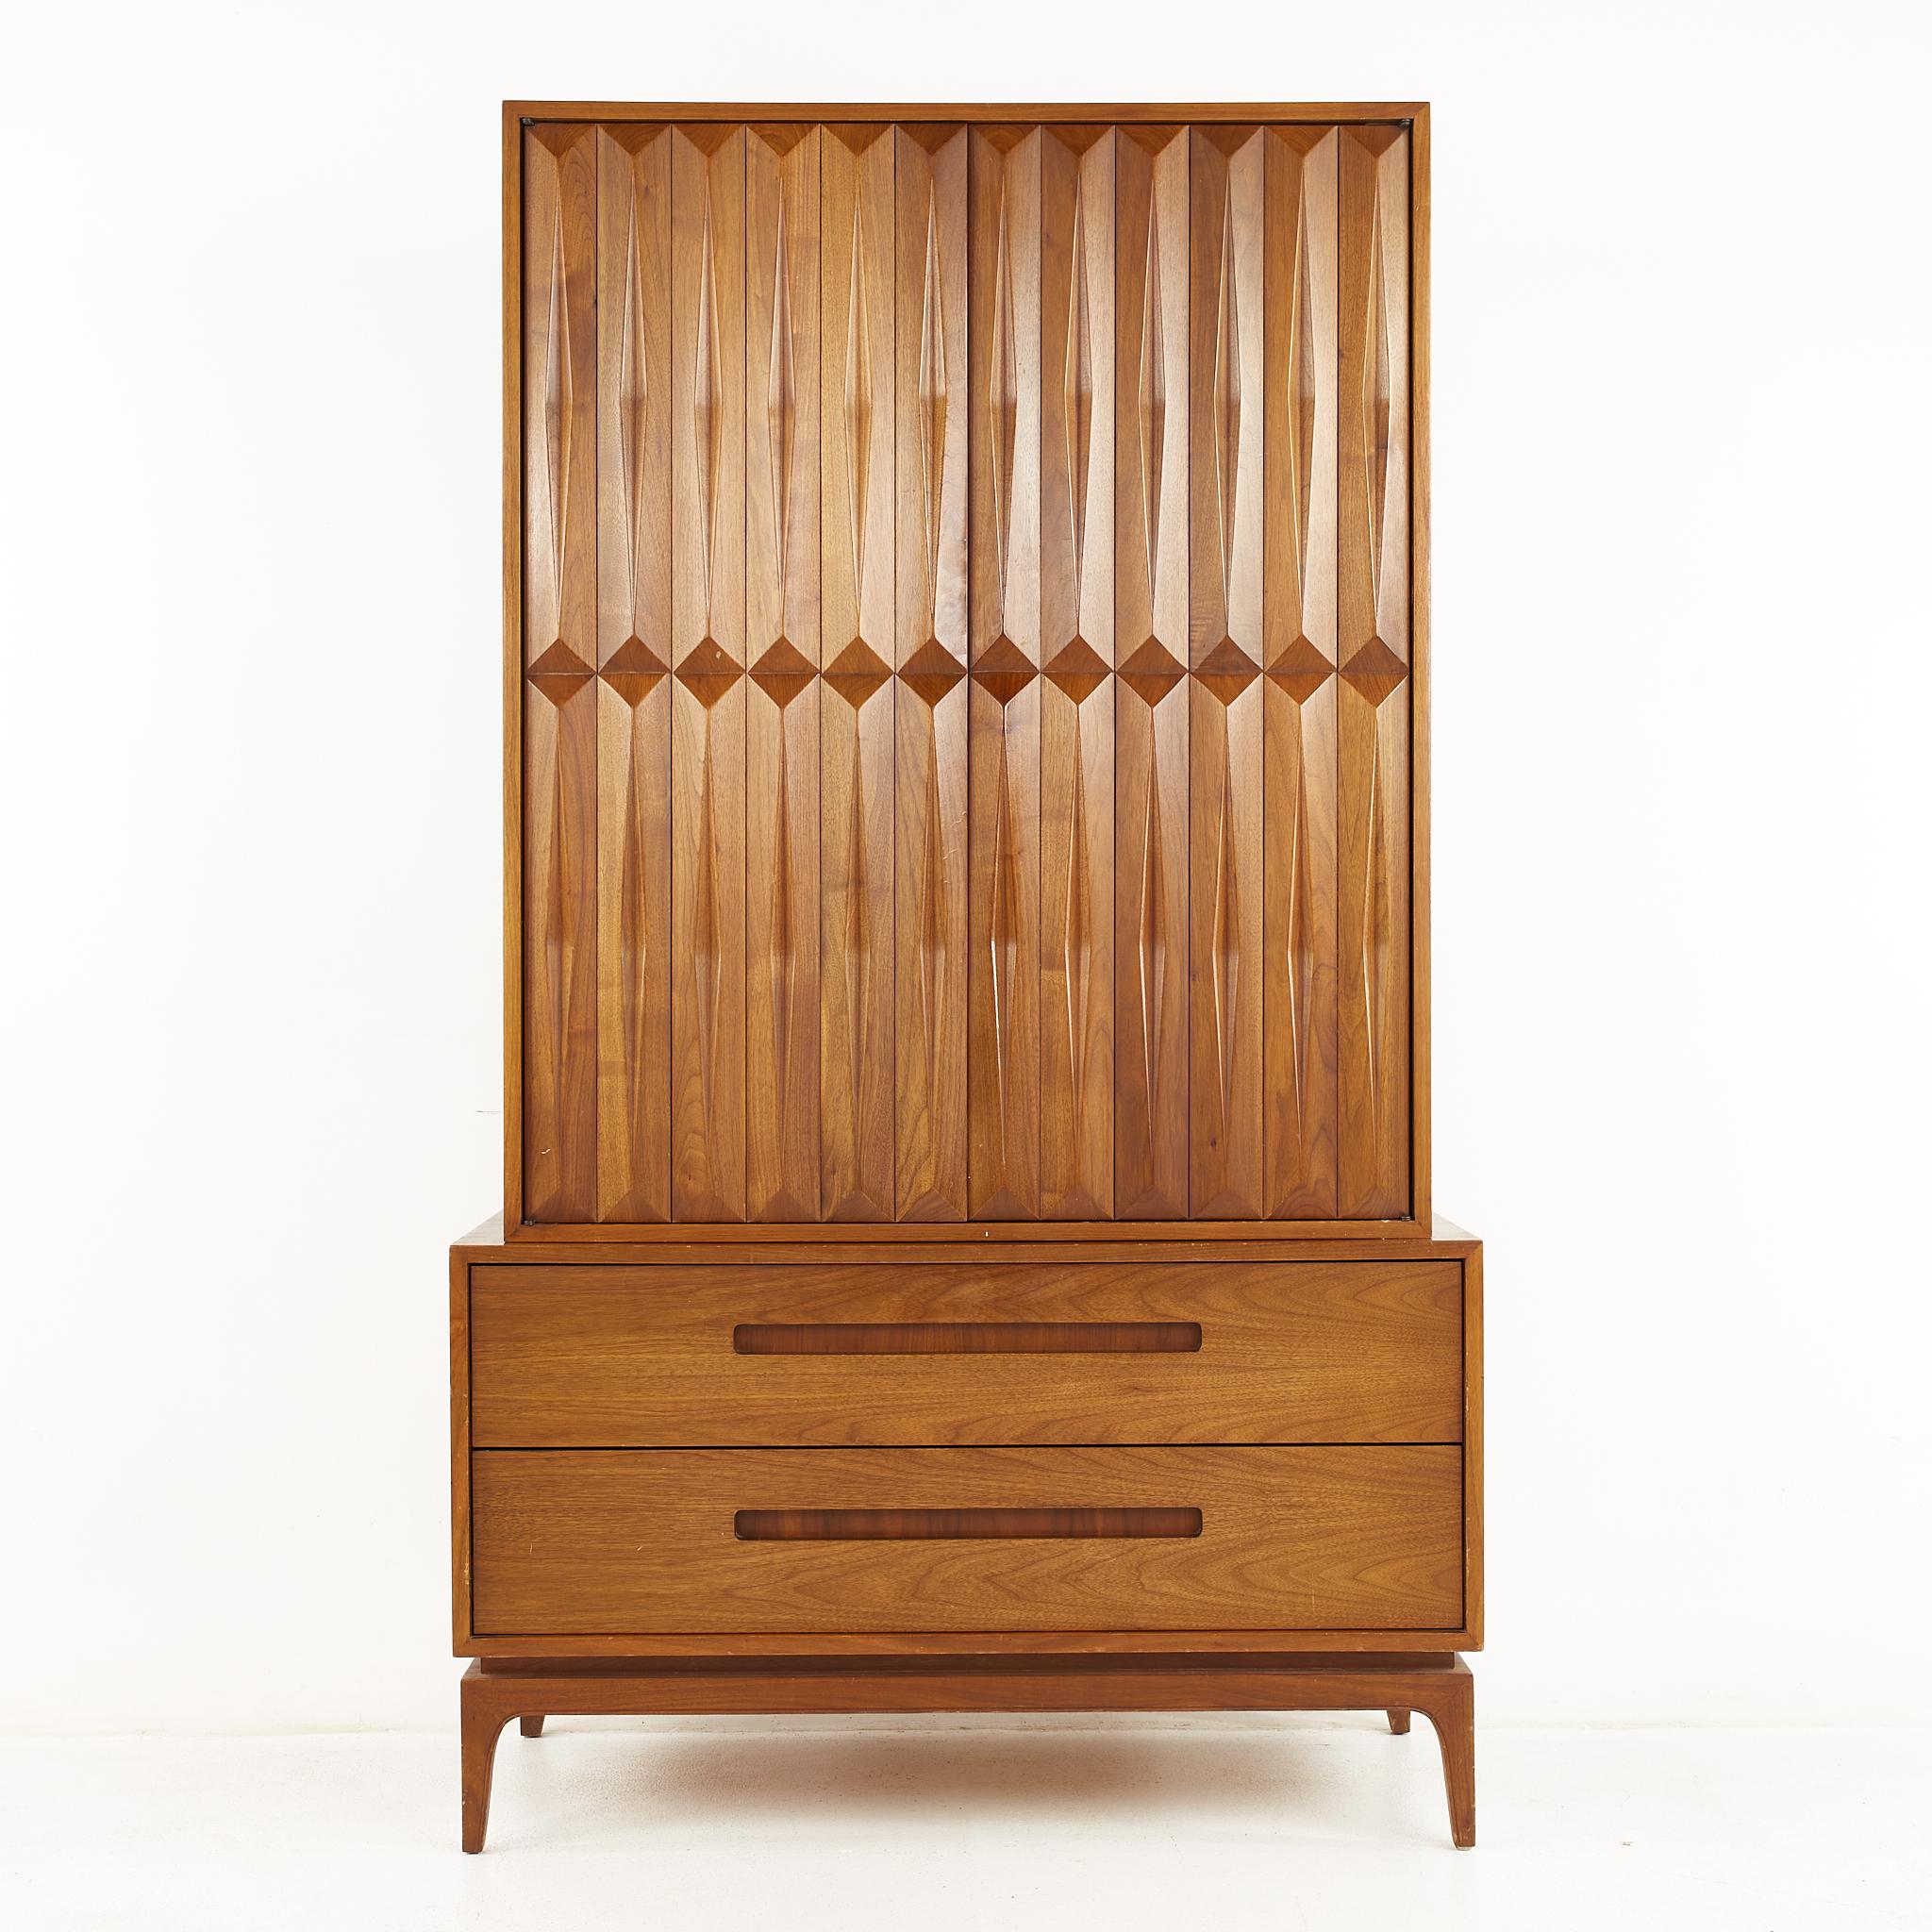 Albert Parvin for American of Martinsville style mid century diamond walnut armoire highboy dresser

Measures: This dresser is 41.5 wide x 19 deep x 70.75 inches high

All pieces of furniture can be had in what we call restored vintage